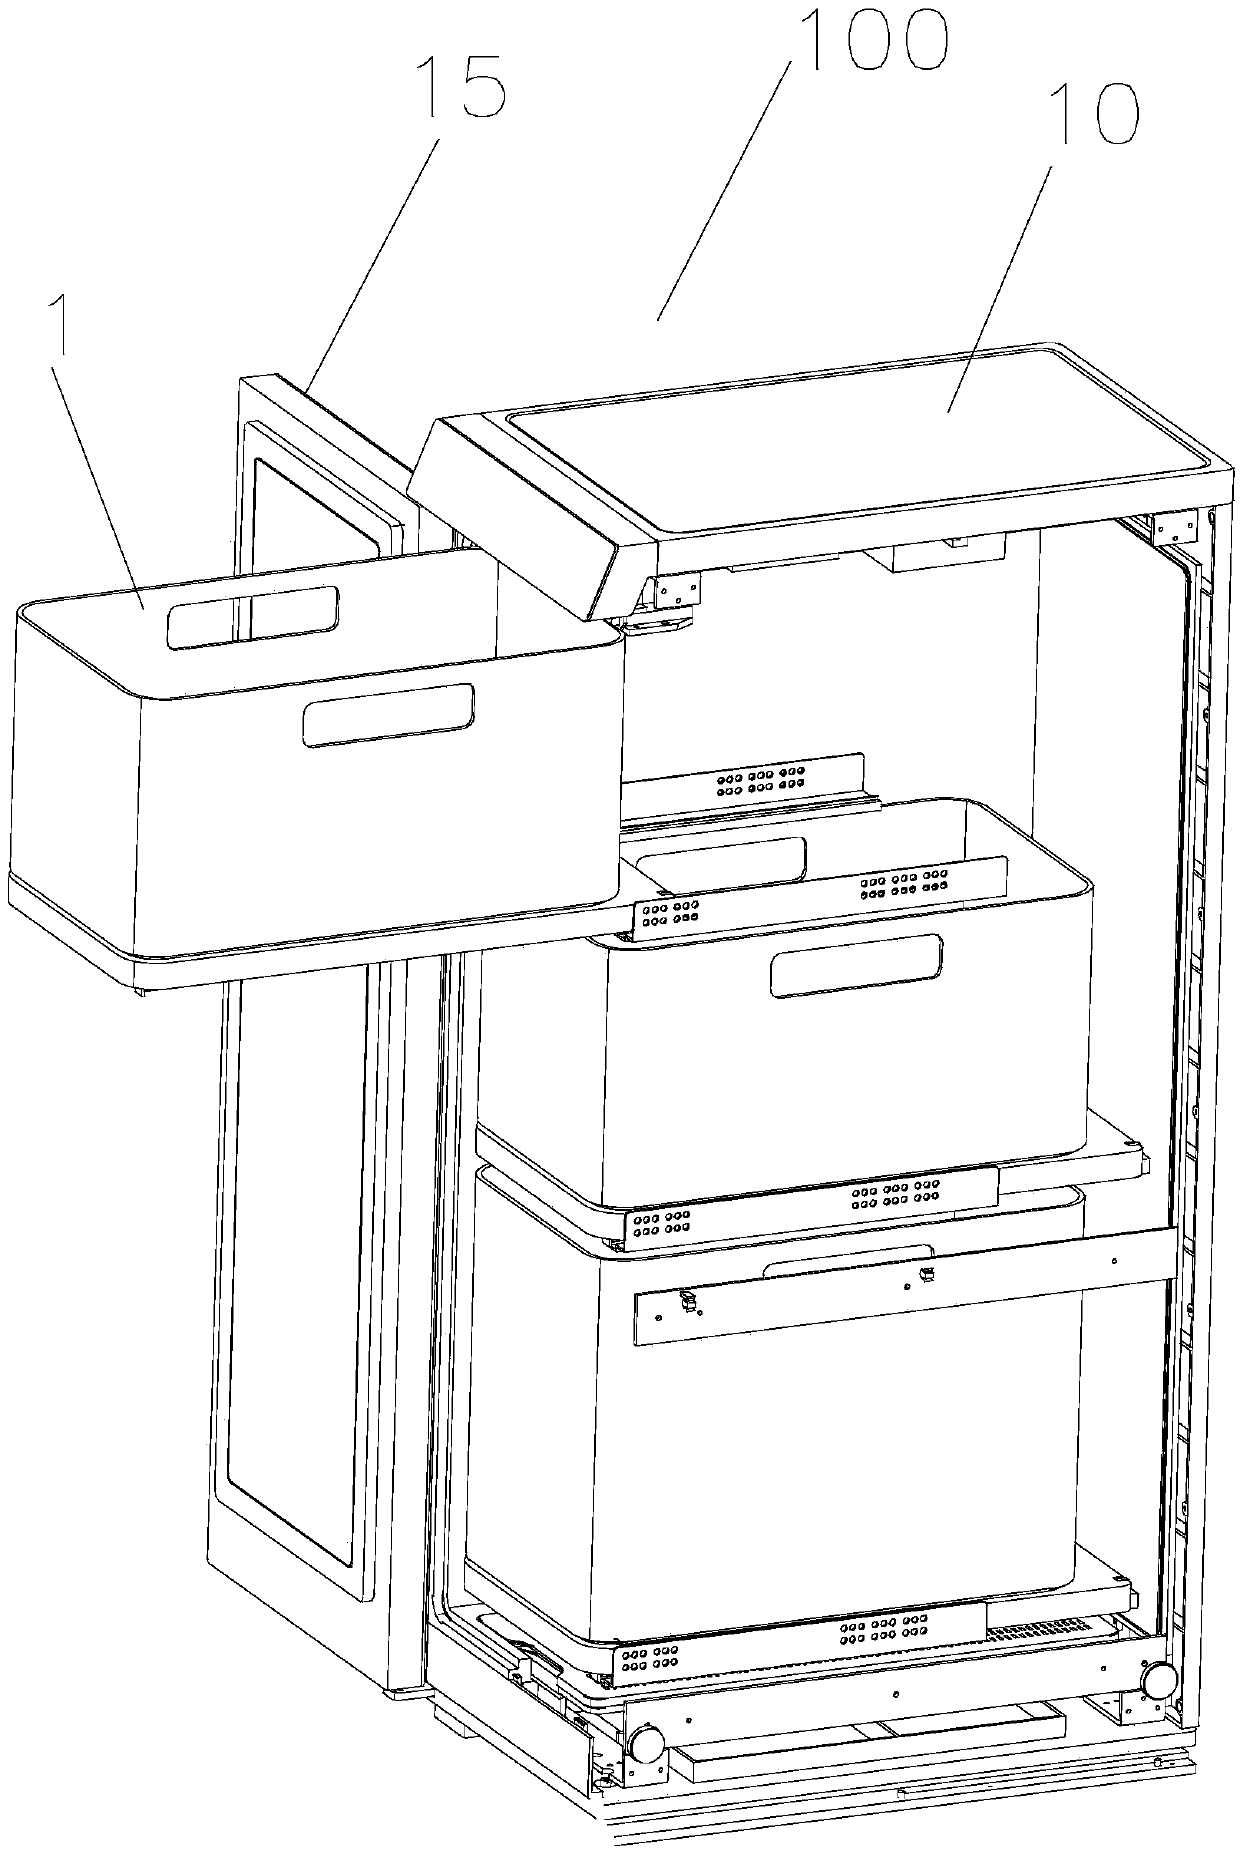 Drawing structure of containing box body and clothes storage device